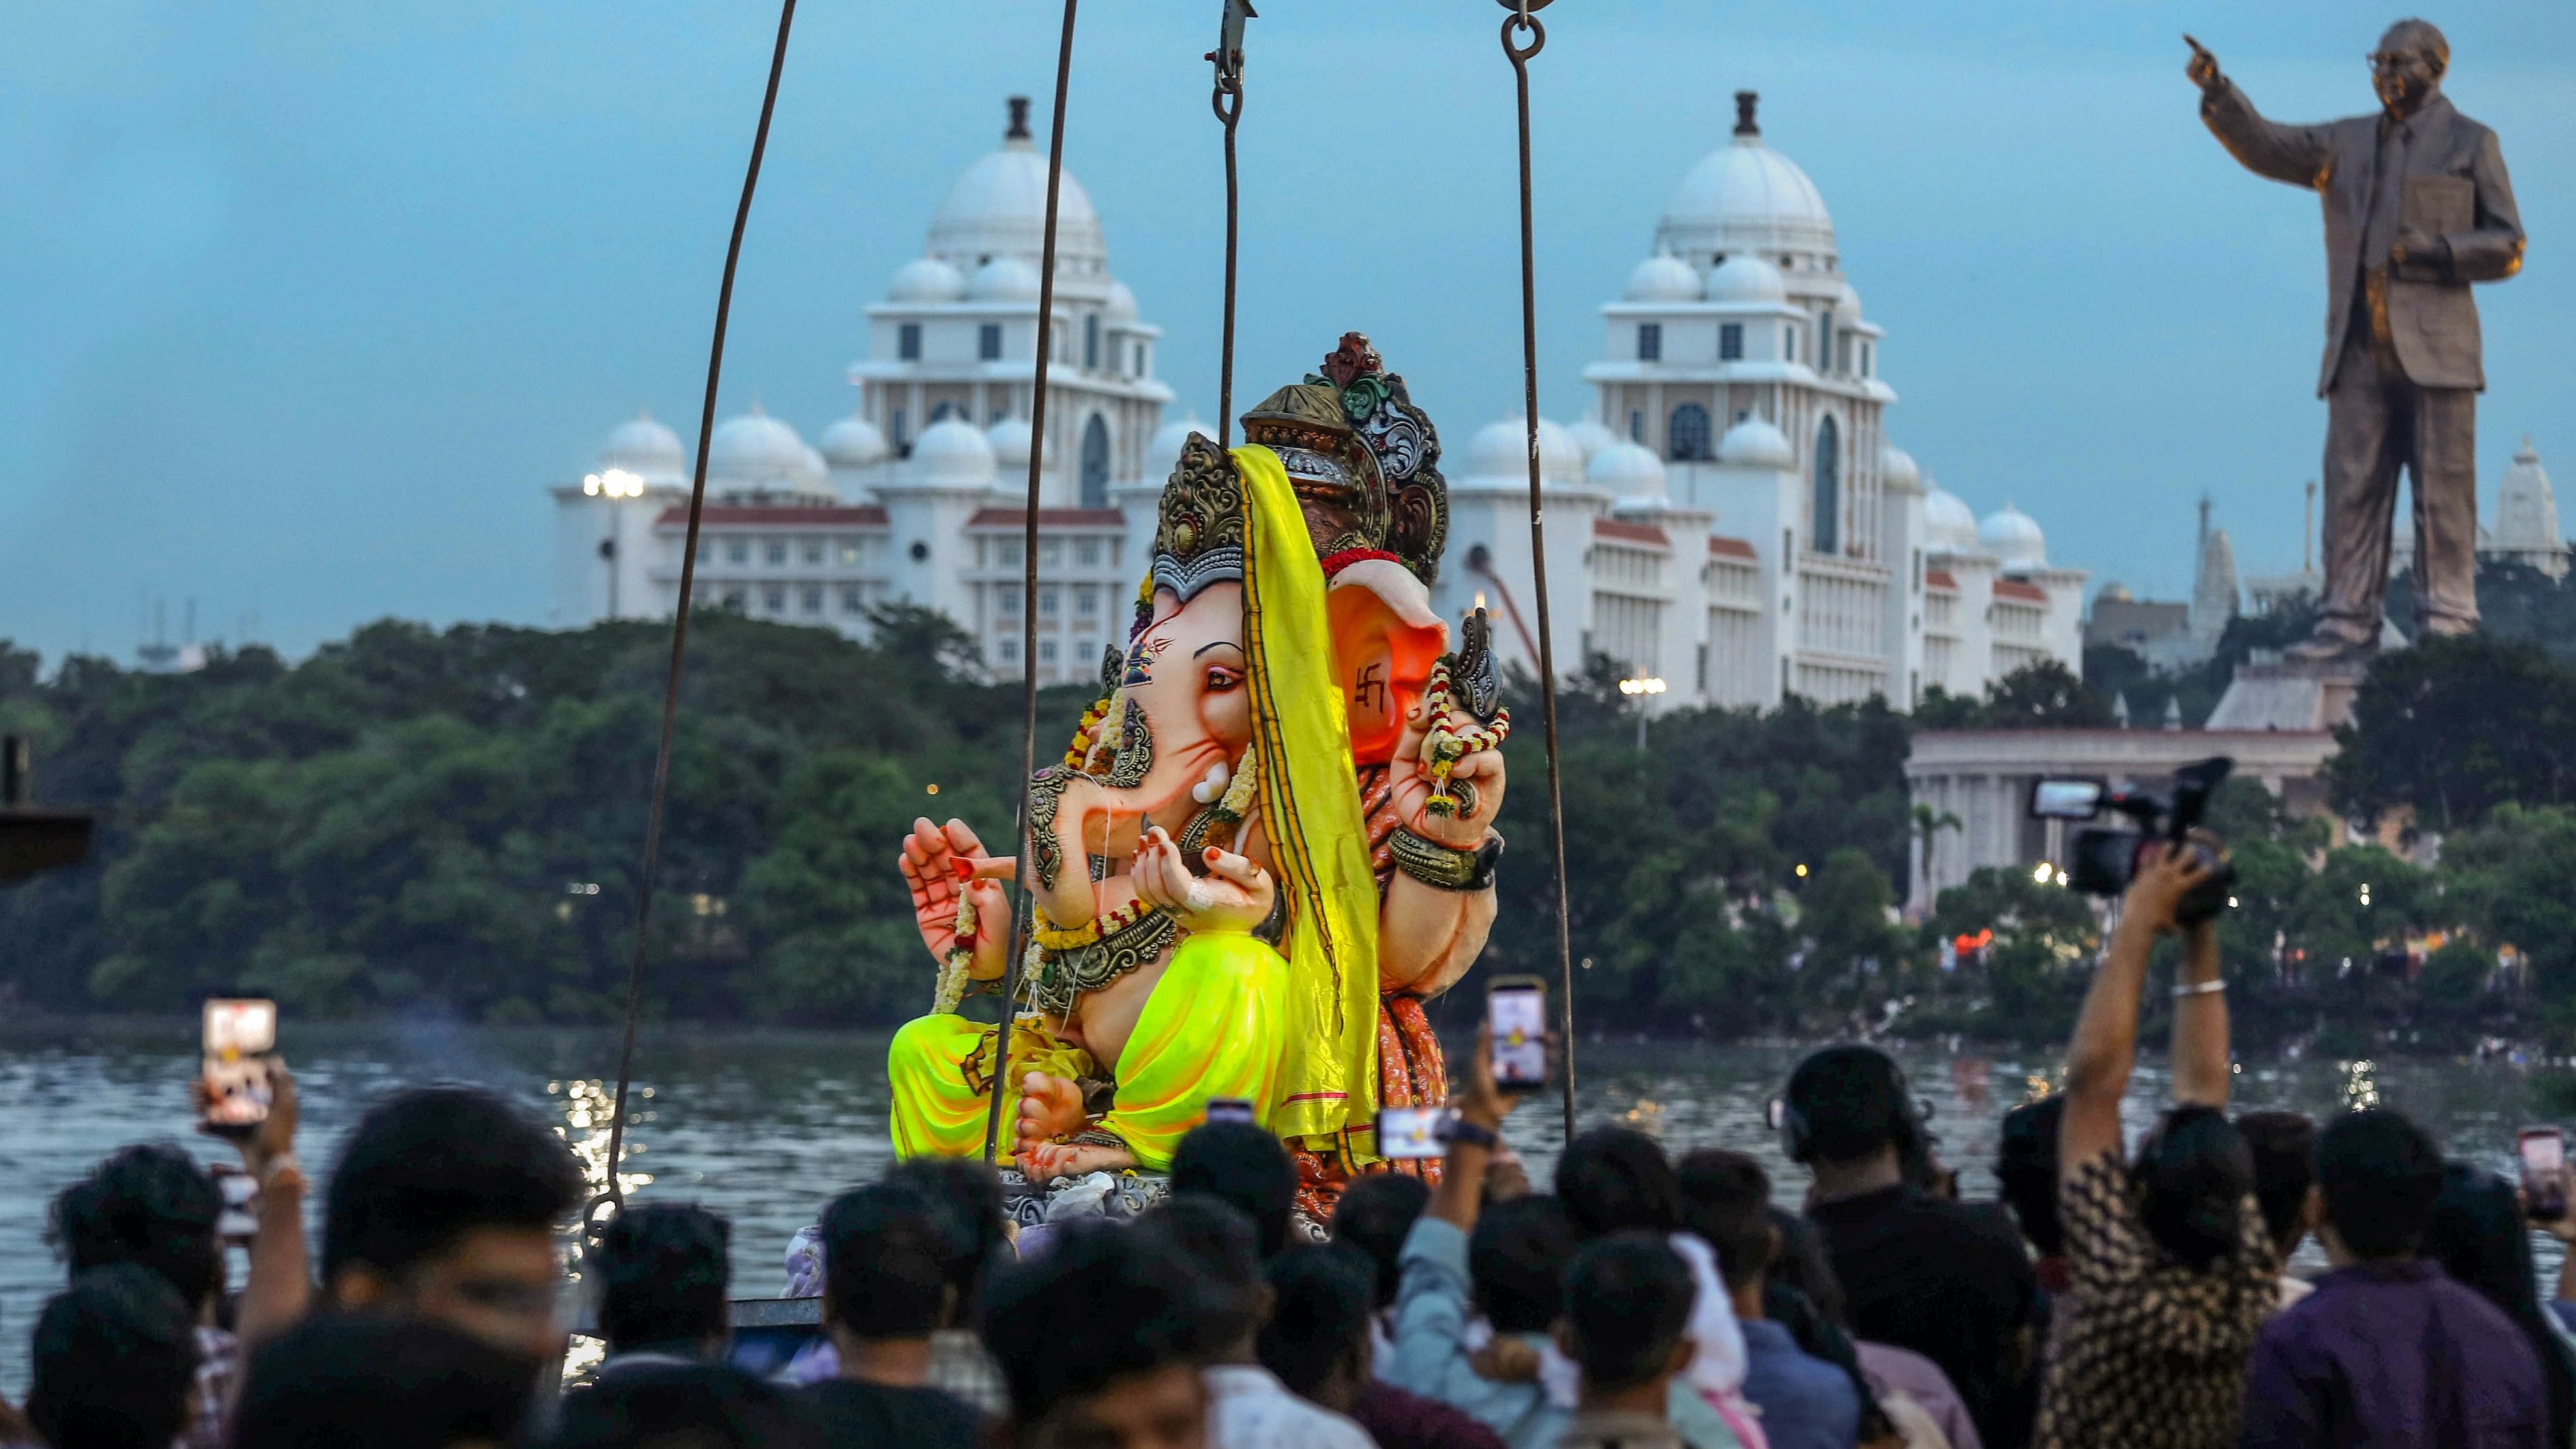 <div class="paragraphs"><p>An idol of Lord Ganesha being immersed in Hussain Sagar Lake as part of Ganesh Chaturthi festivities, in Hyderabad.</p></div>